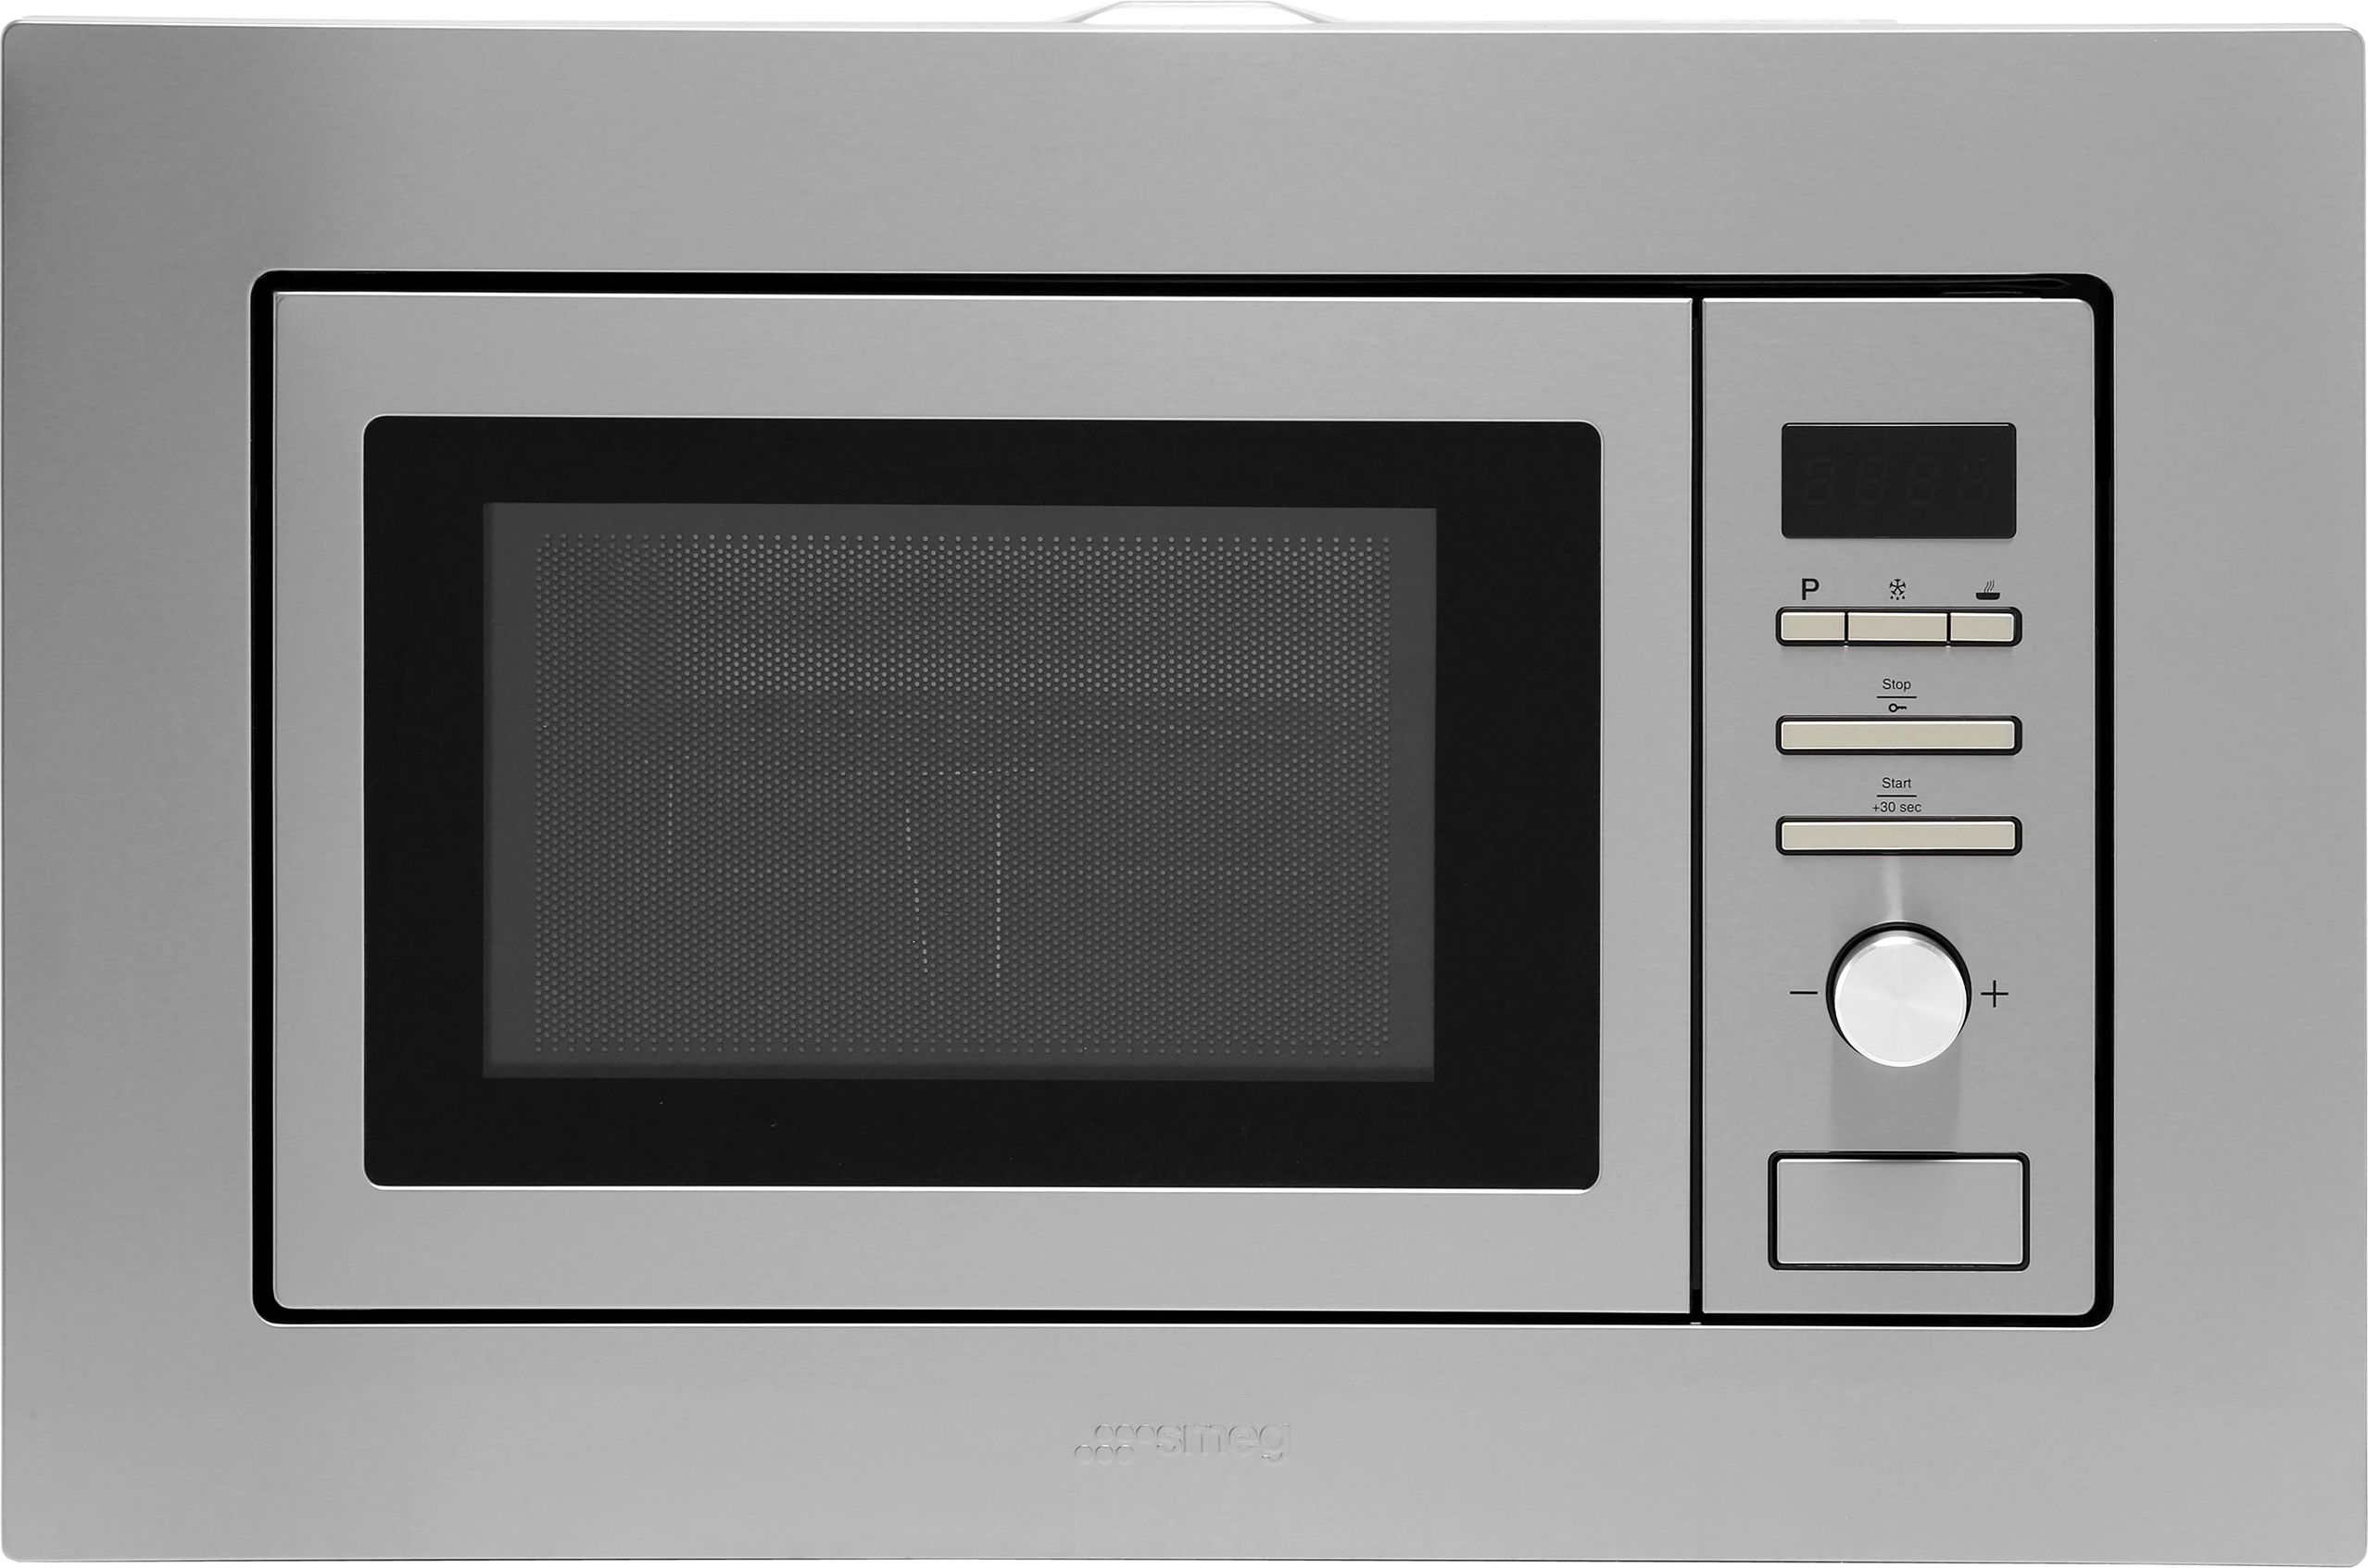 Smeg FMI020X 39cm tall, 60cm wide, Built In Compact Microwave - Stainless Steel, Stainless Steel